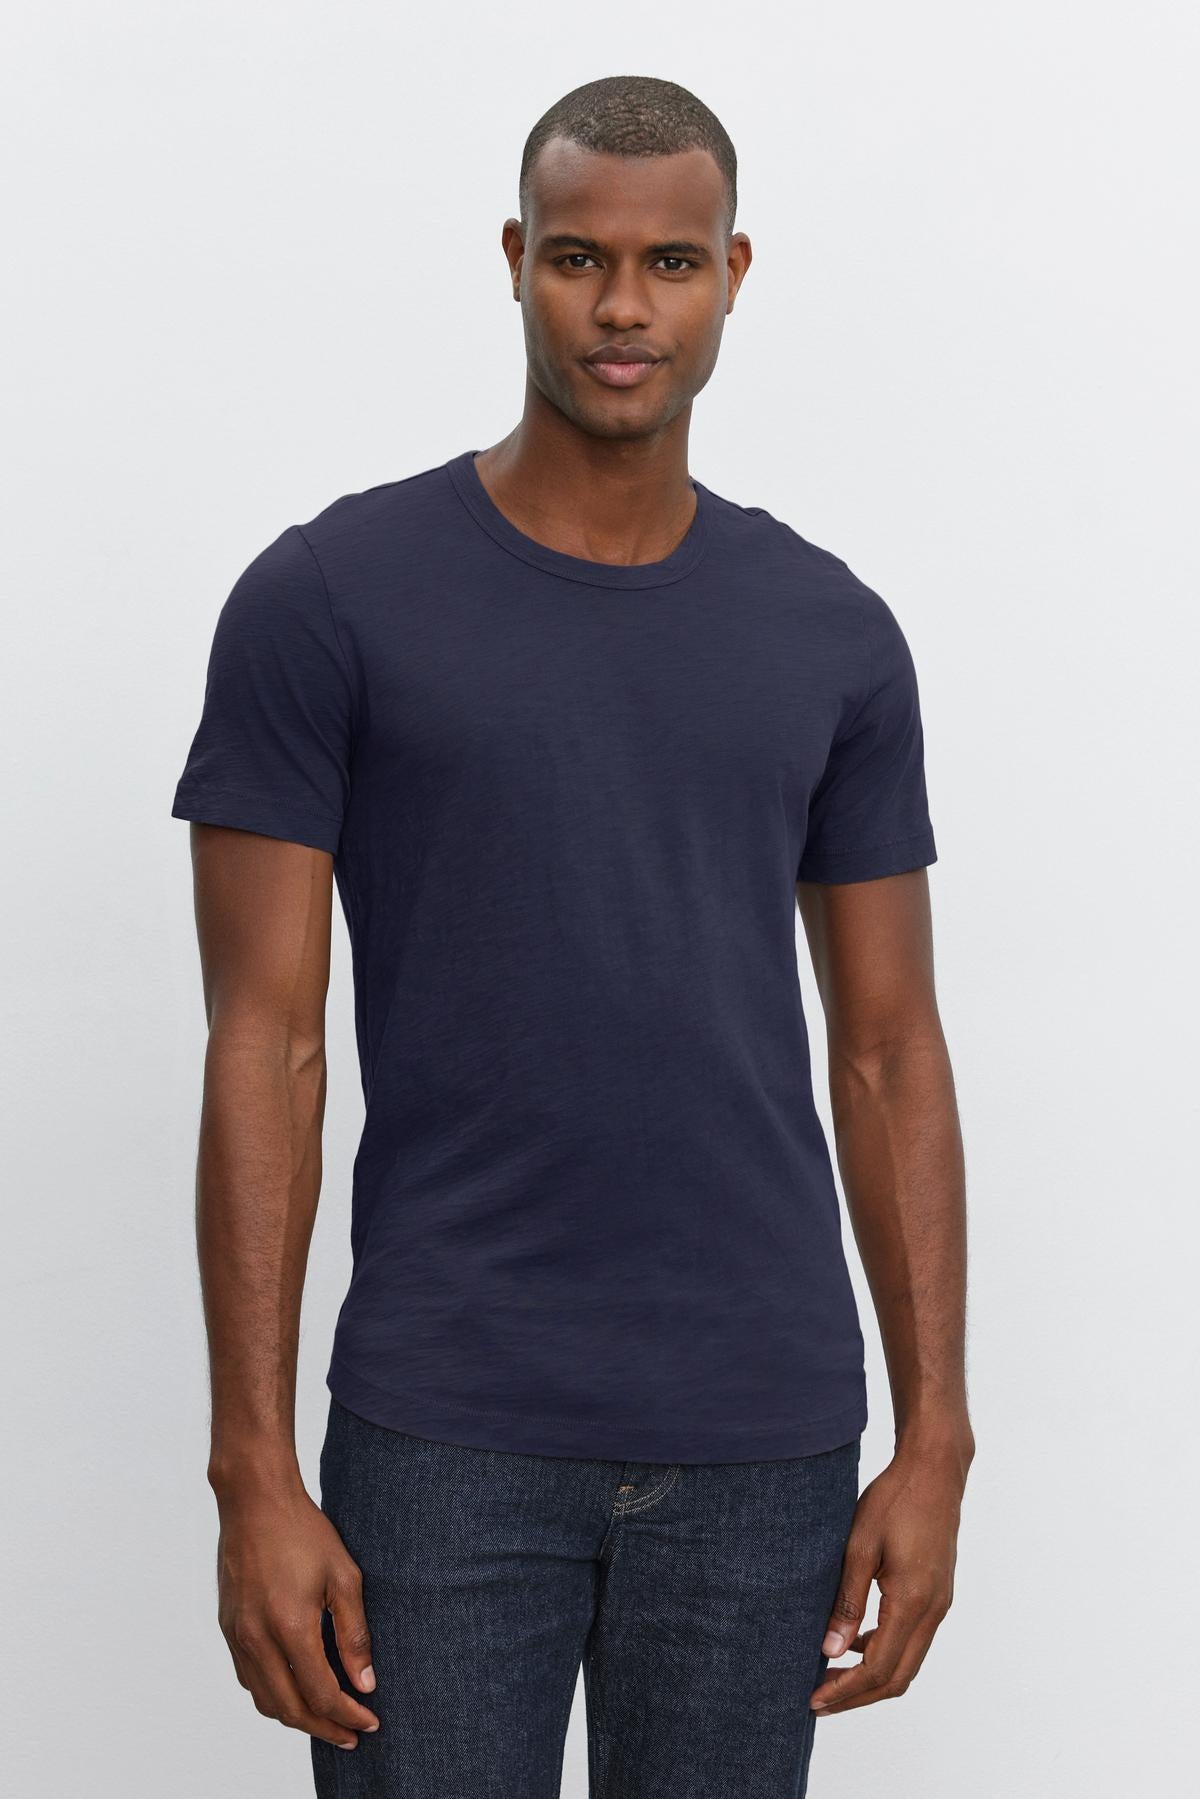 Man wearing a navy blue Velvet by Graham & Spencer AMARO TEE and jeans standing against a plain background.-36273921917121